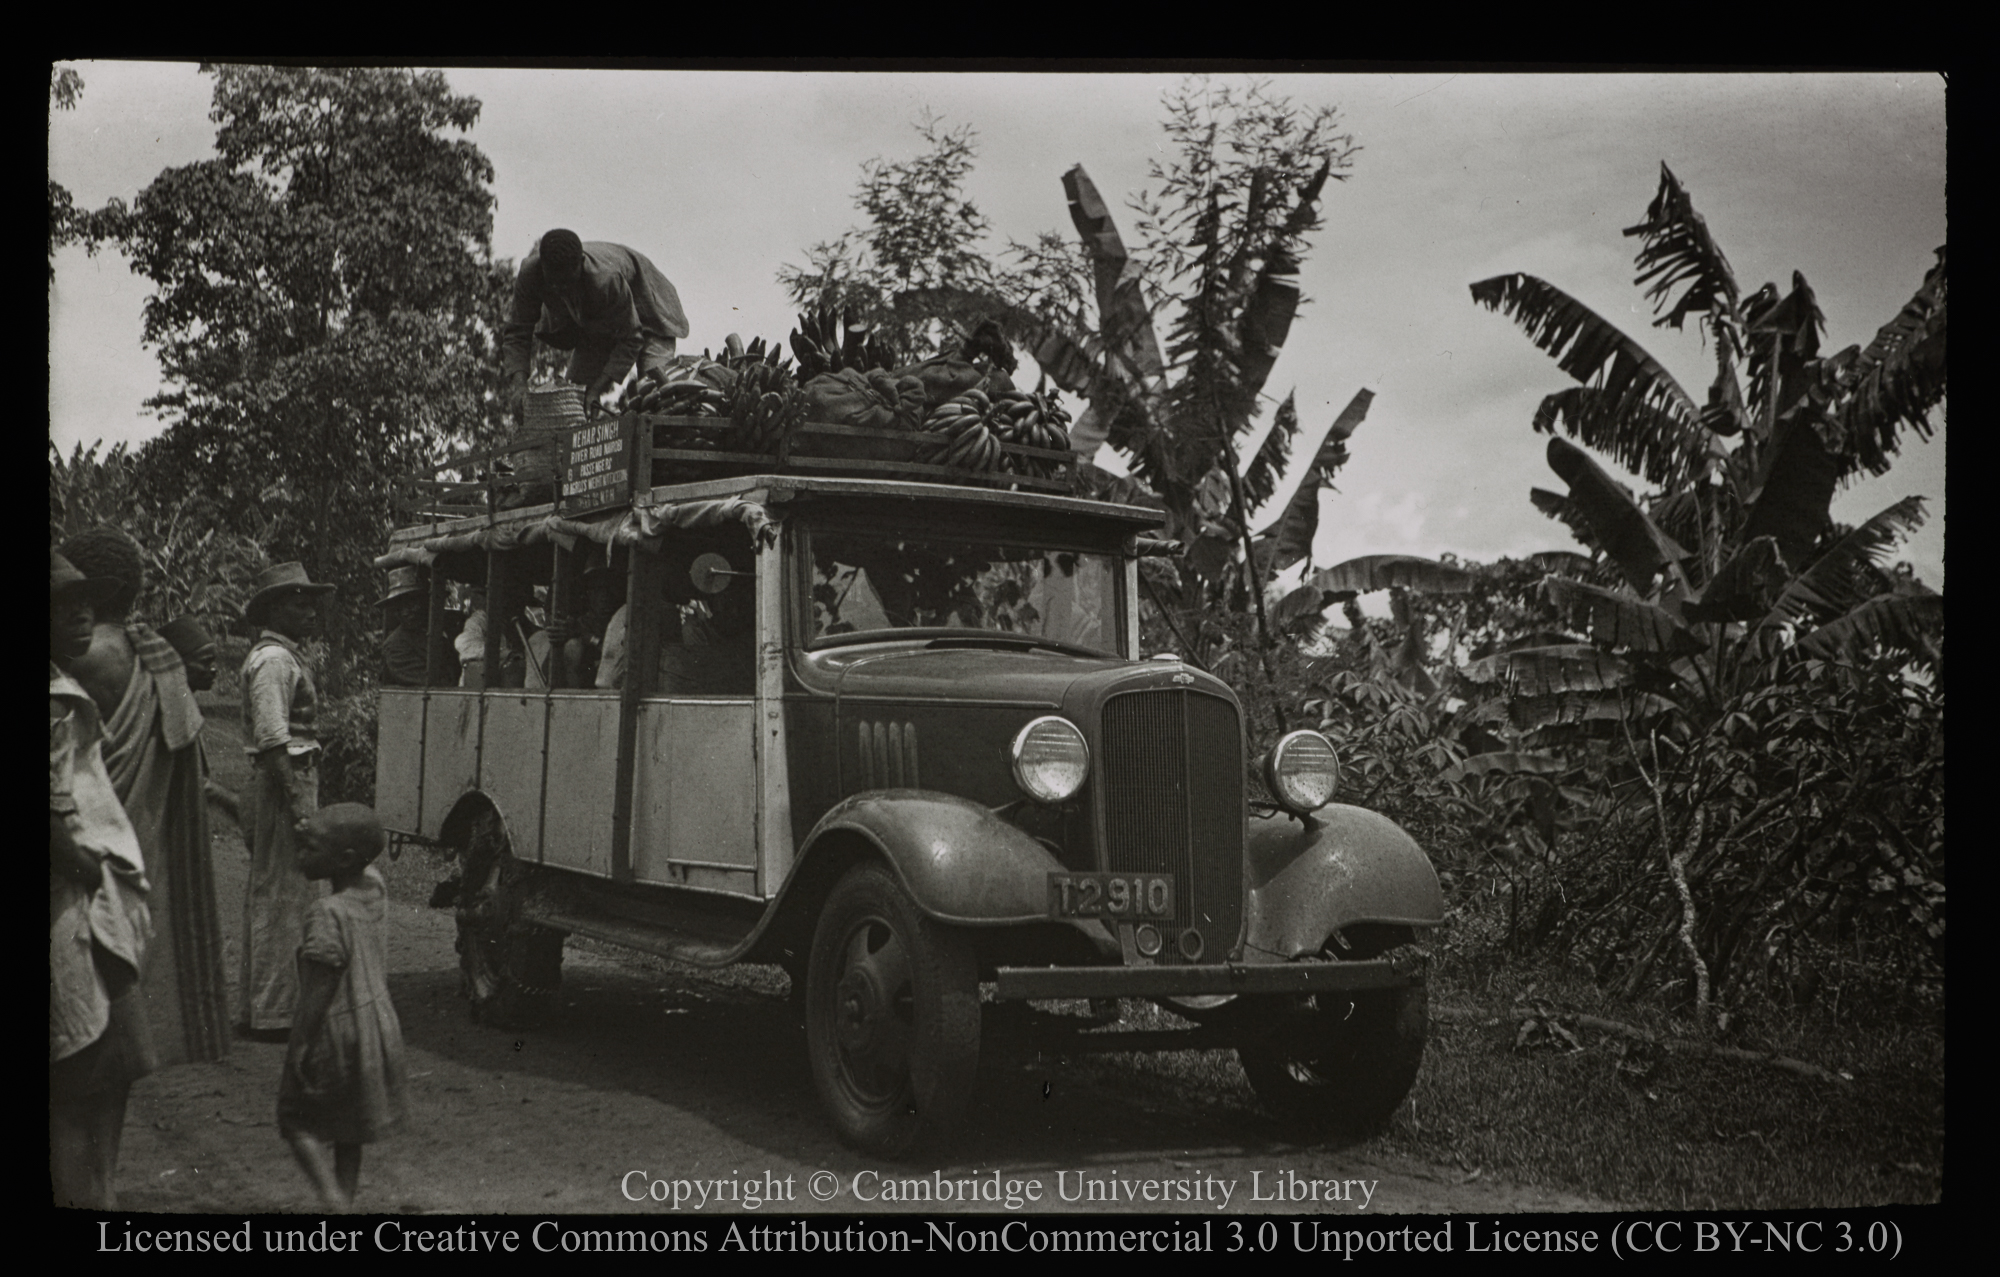 Bus and passengers by banana trees, 1937